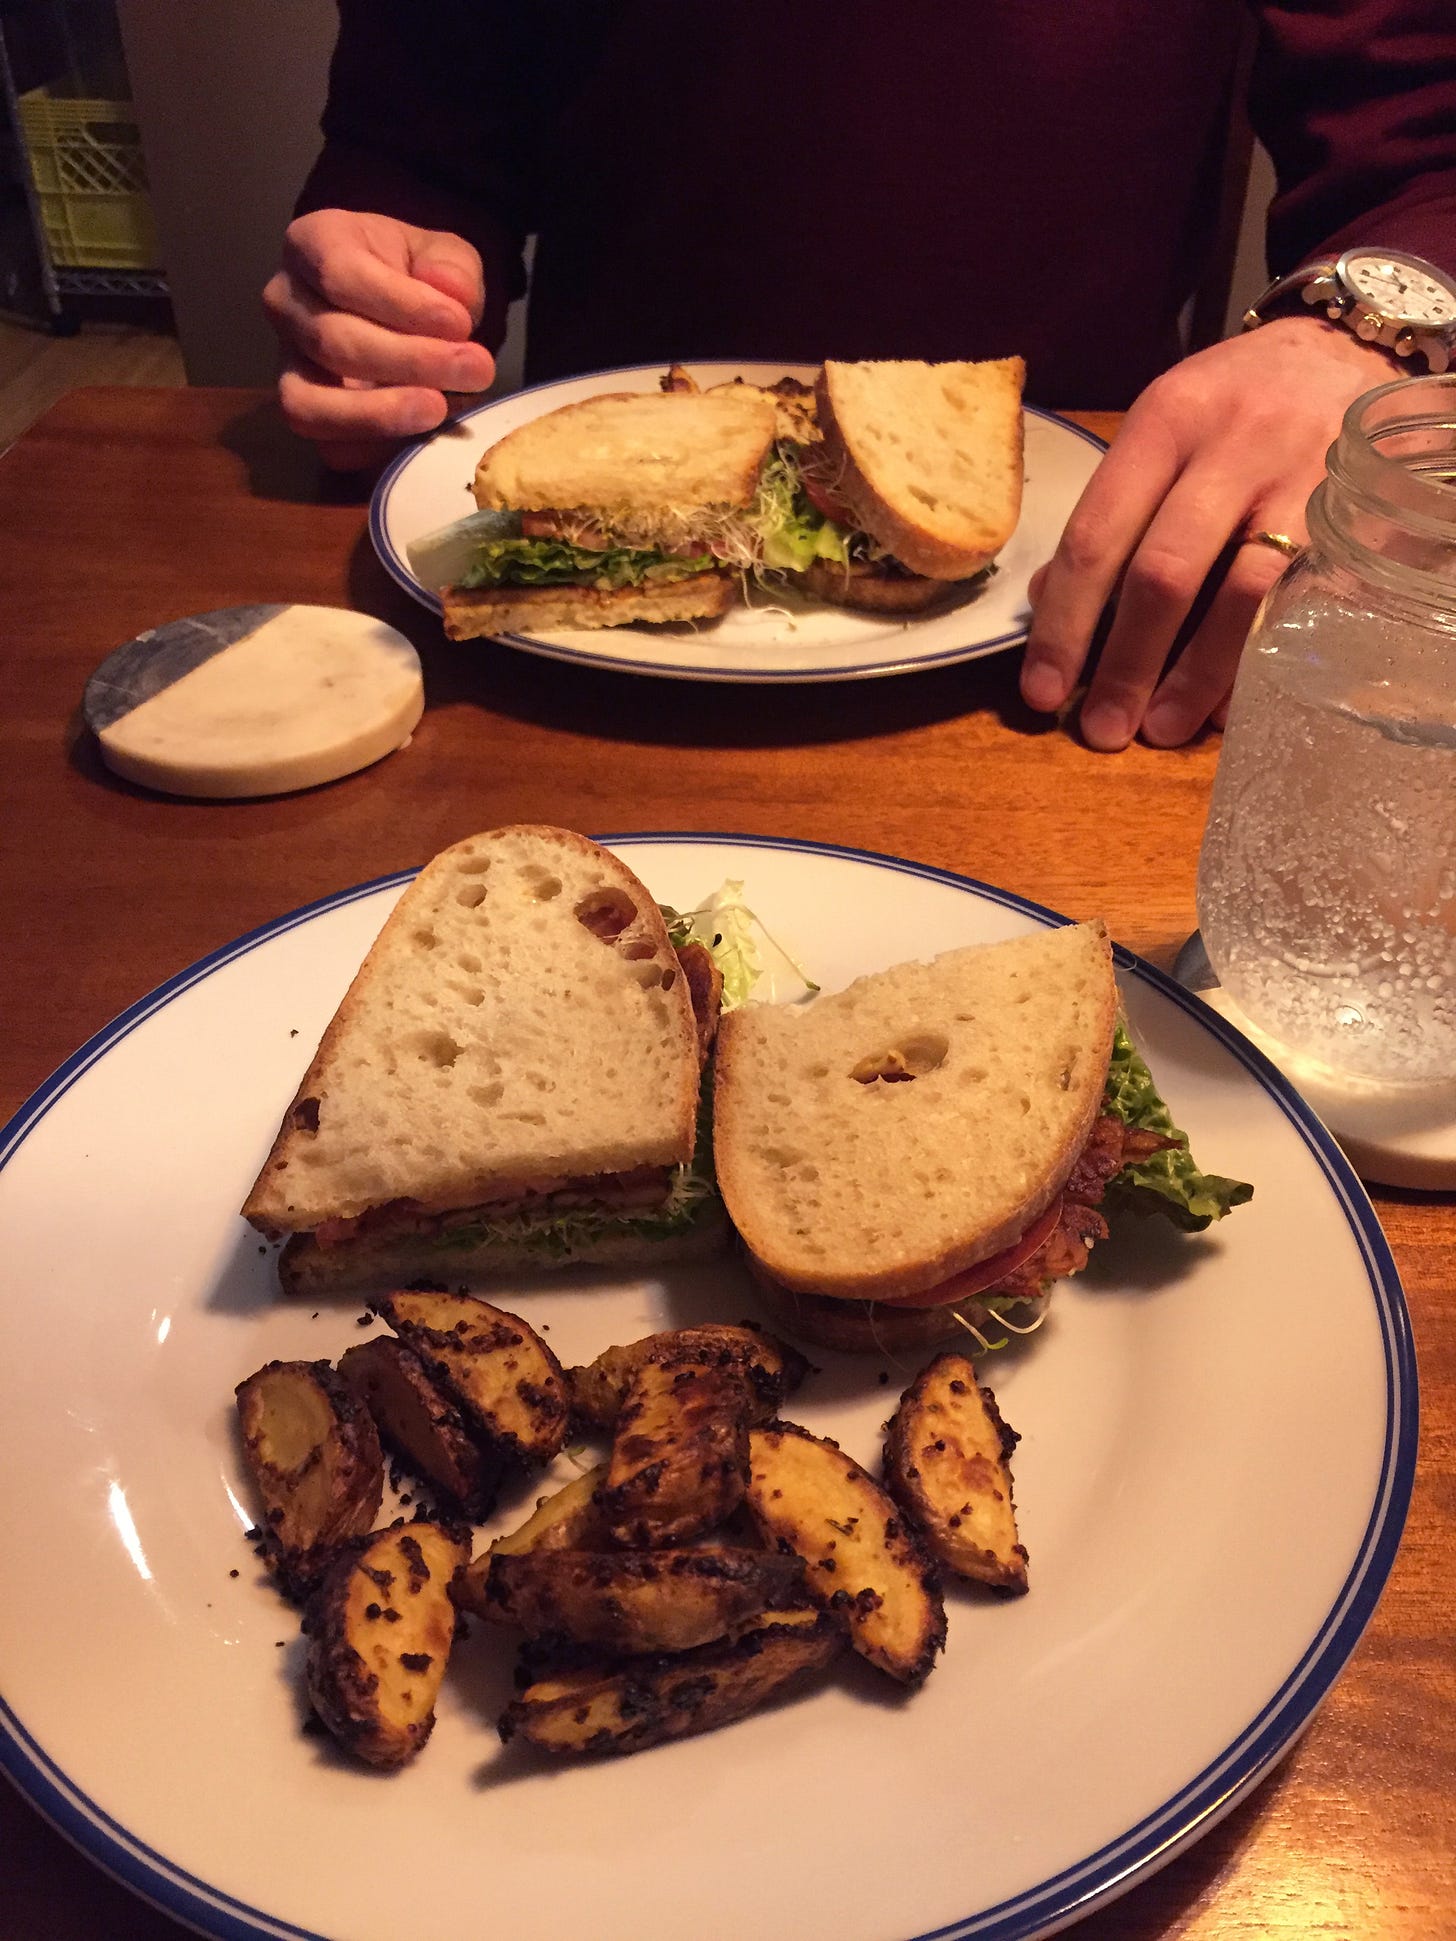 Two halves of a tempeh BLT with sprouts sit on a plate next to a small pile of mustard-roasted potatoes. The same food is on a plate at the other side of the table, with Jeff's hand on the table beside the plate.